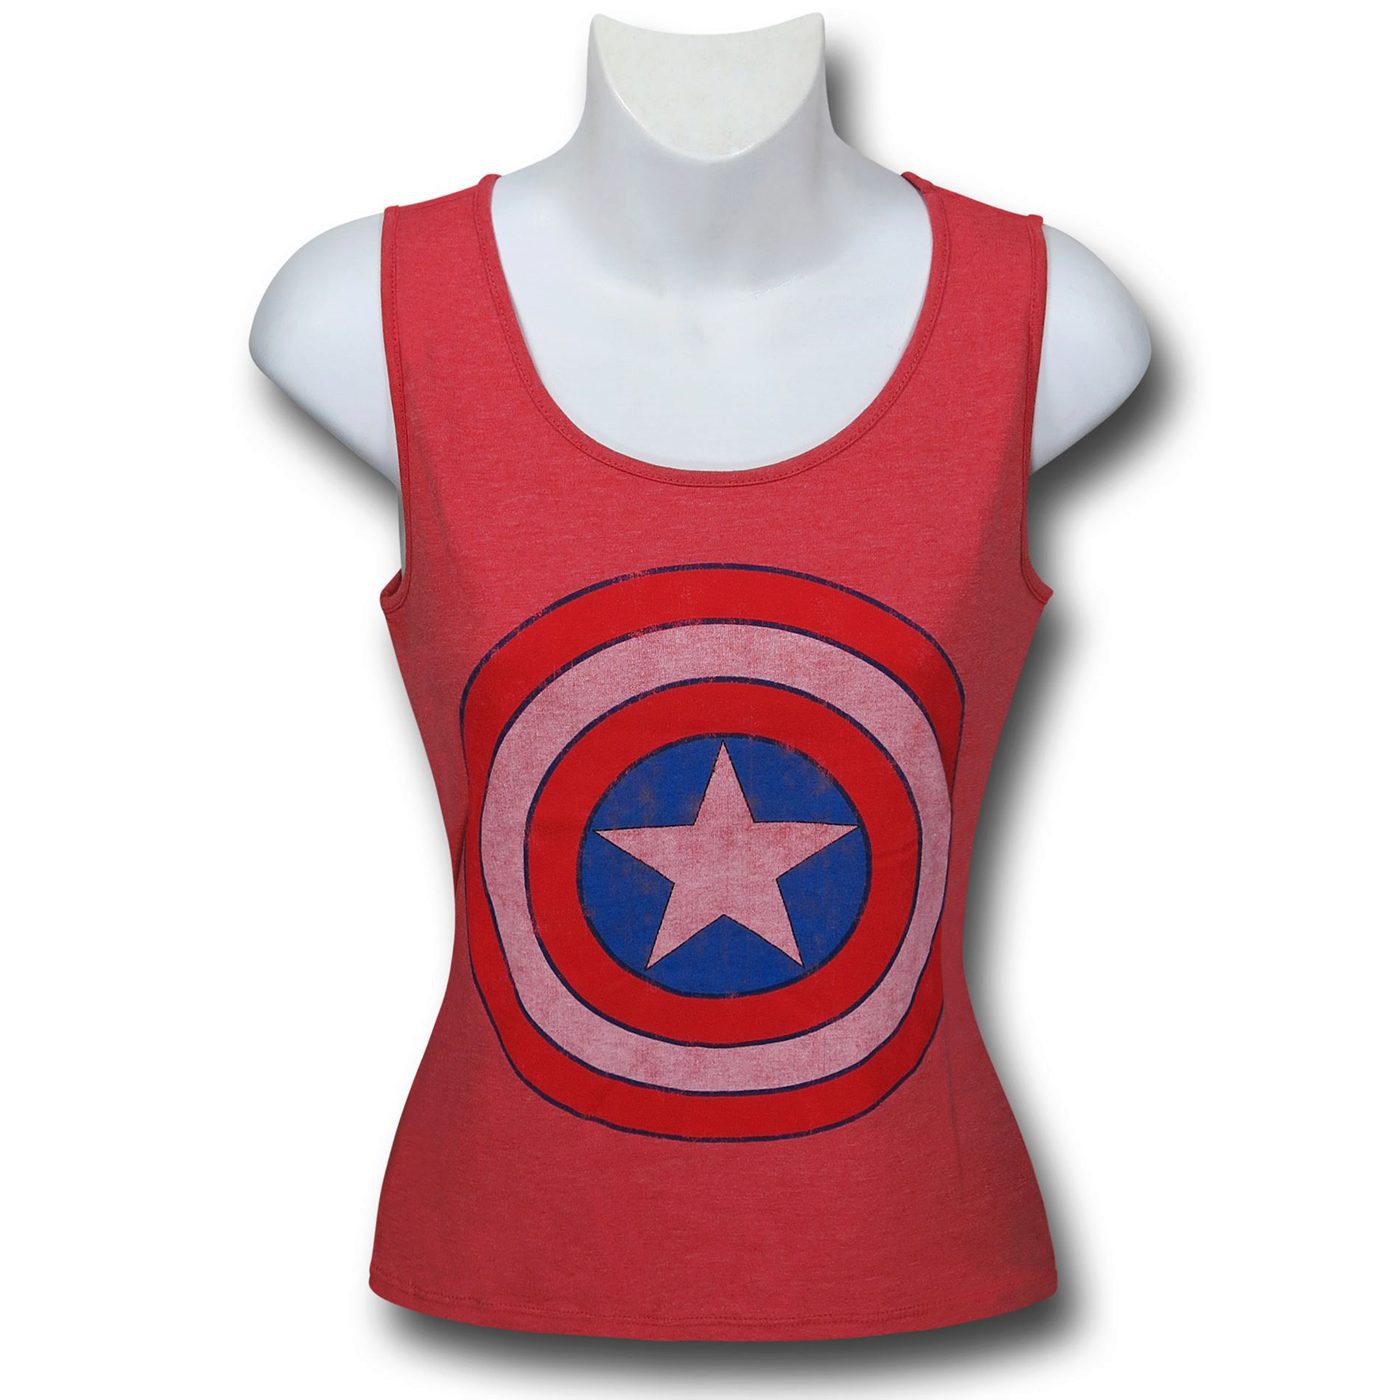 Captain America Shield Women's Red Fitted Tank Top